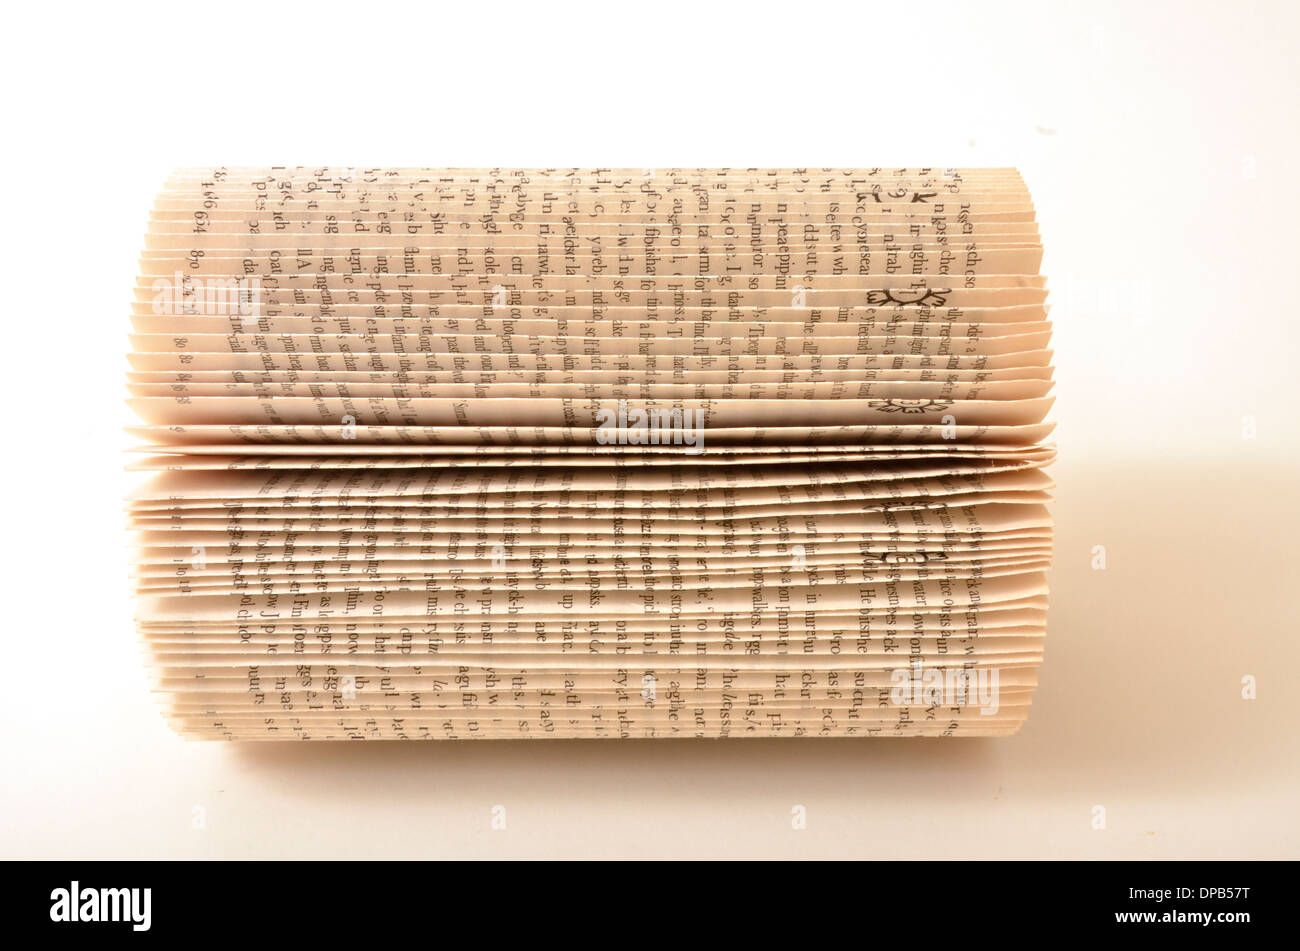 Cylindrical book for continuous reading! Stock Photo